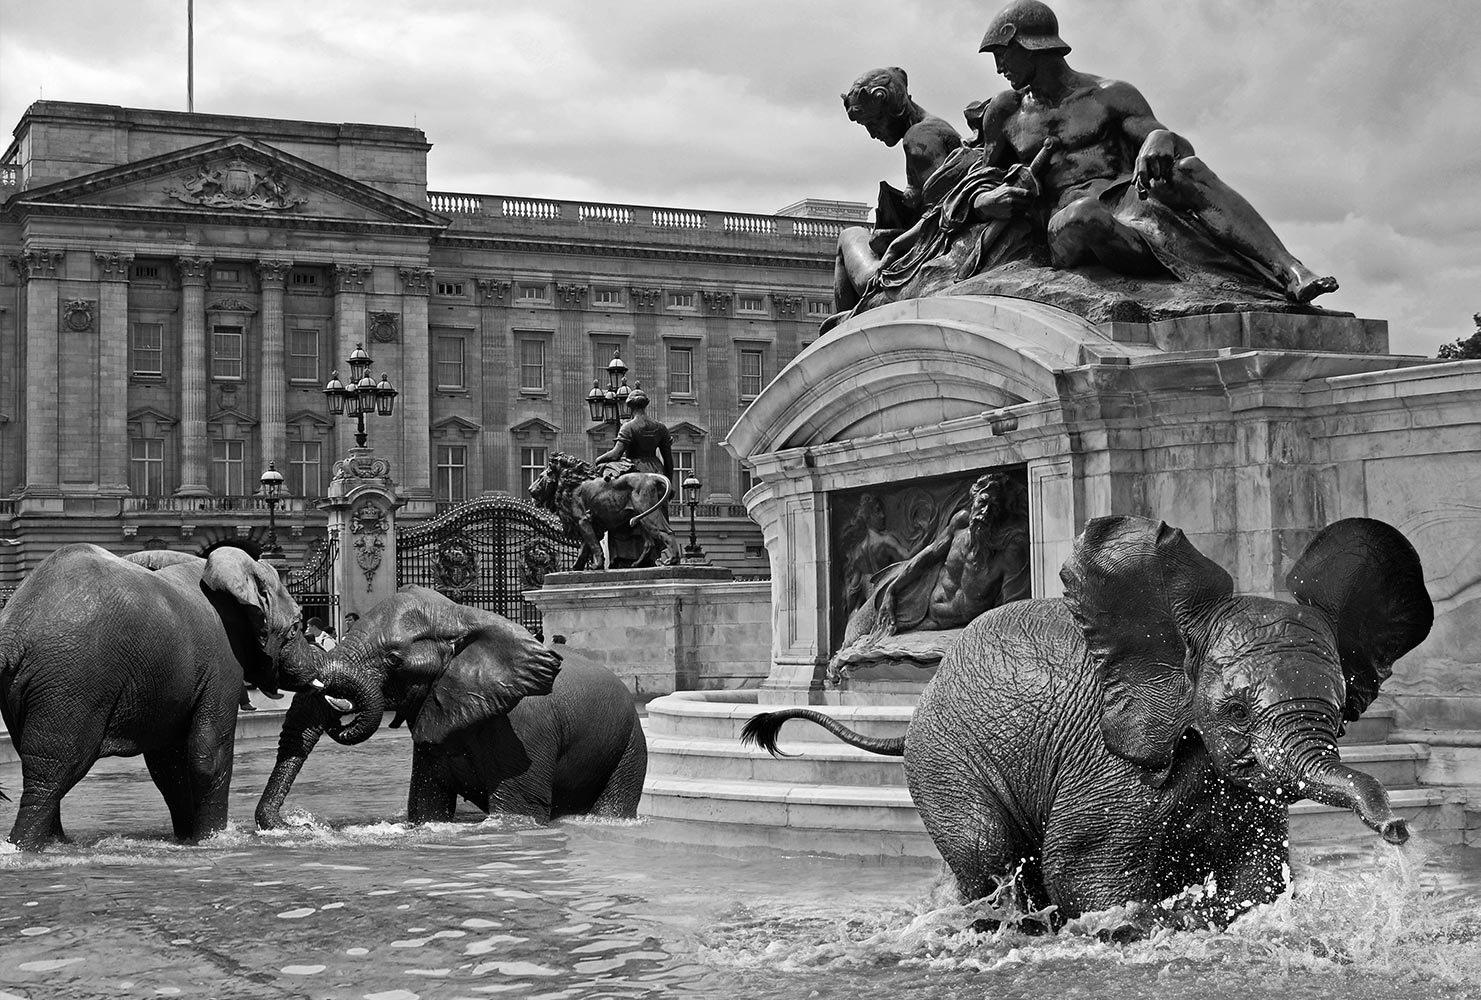 Title: The orphan elephants loved London
Limited Edition Photography Print

Gillie and Marc’s prints are signed, limited-editions and are produced on Entrada Rag Bright 300gsm, 100% acid-free, 100% cotton rag paper, with a 40mm white